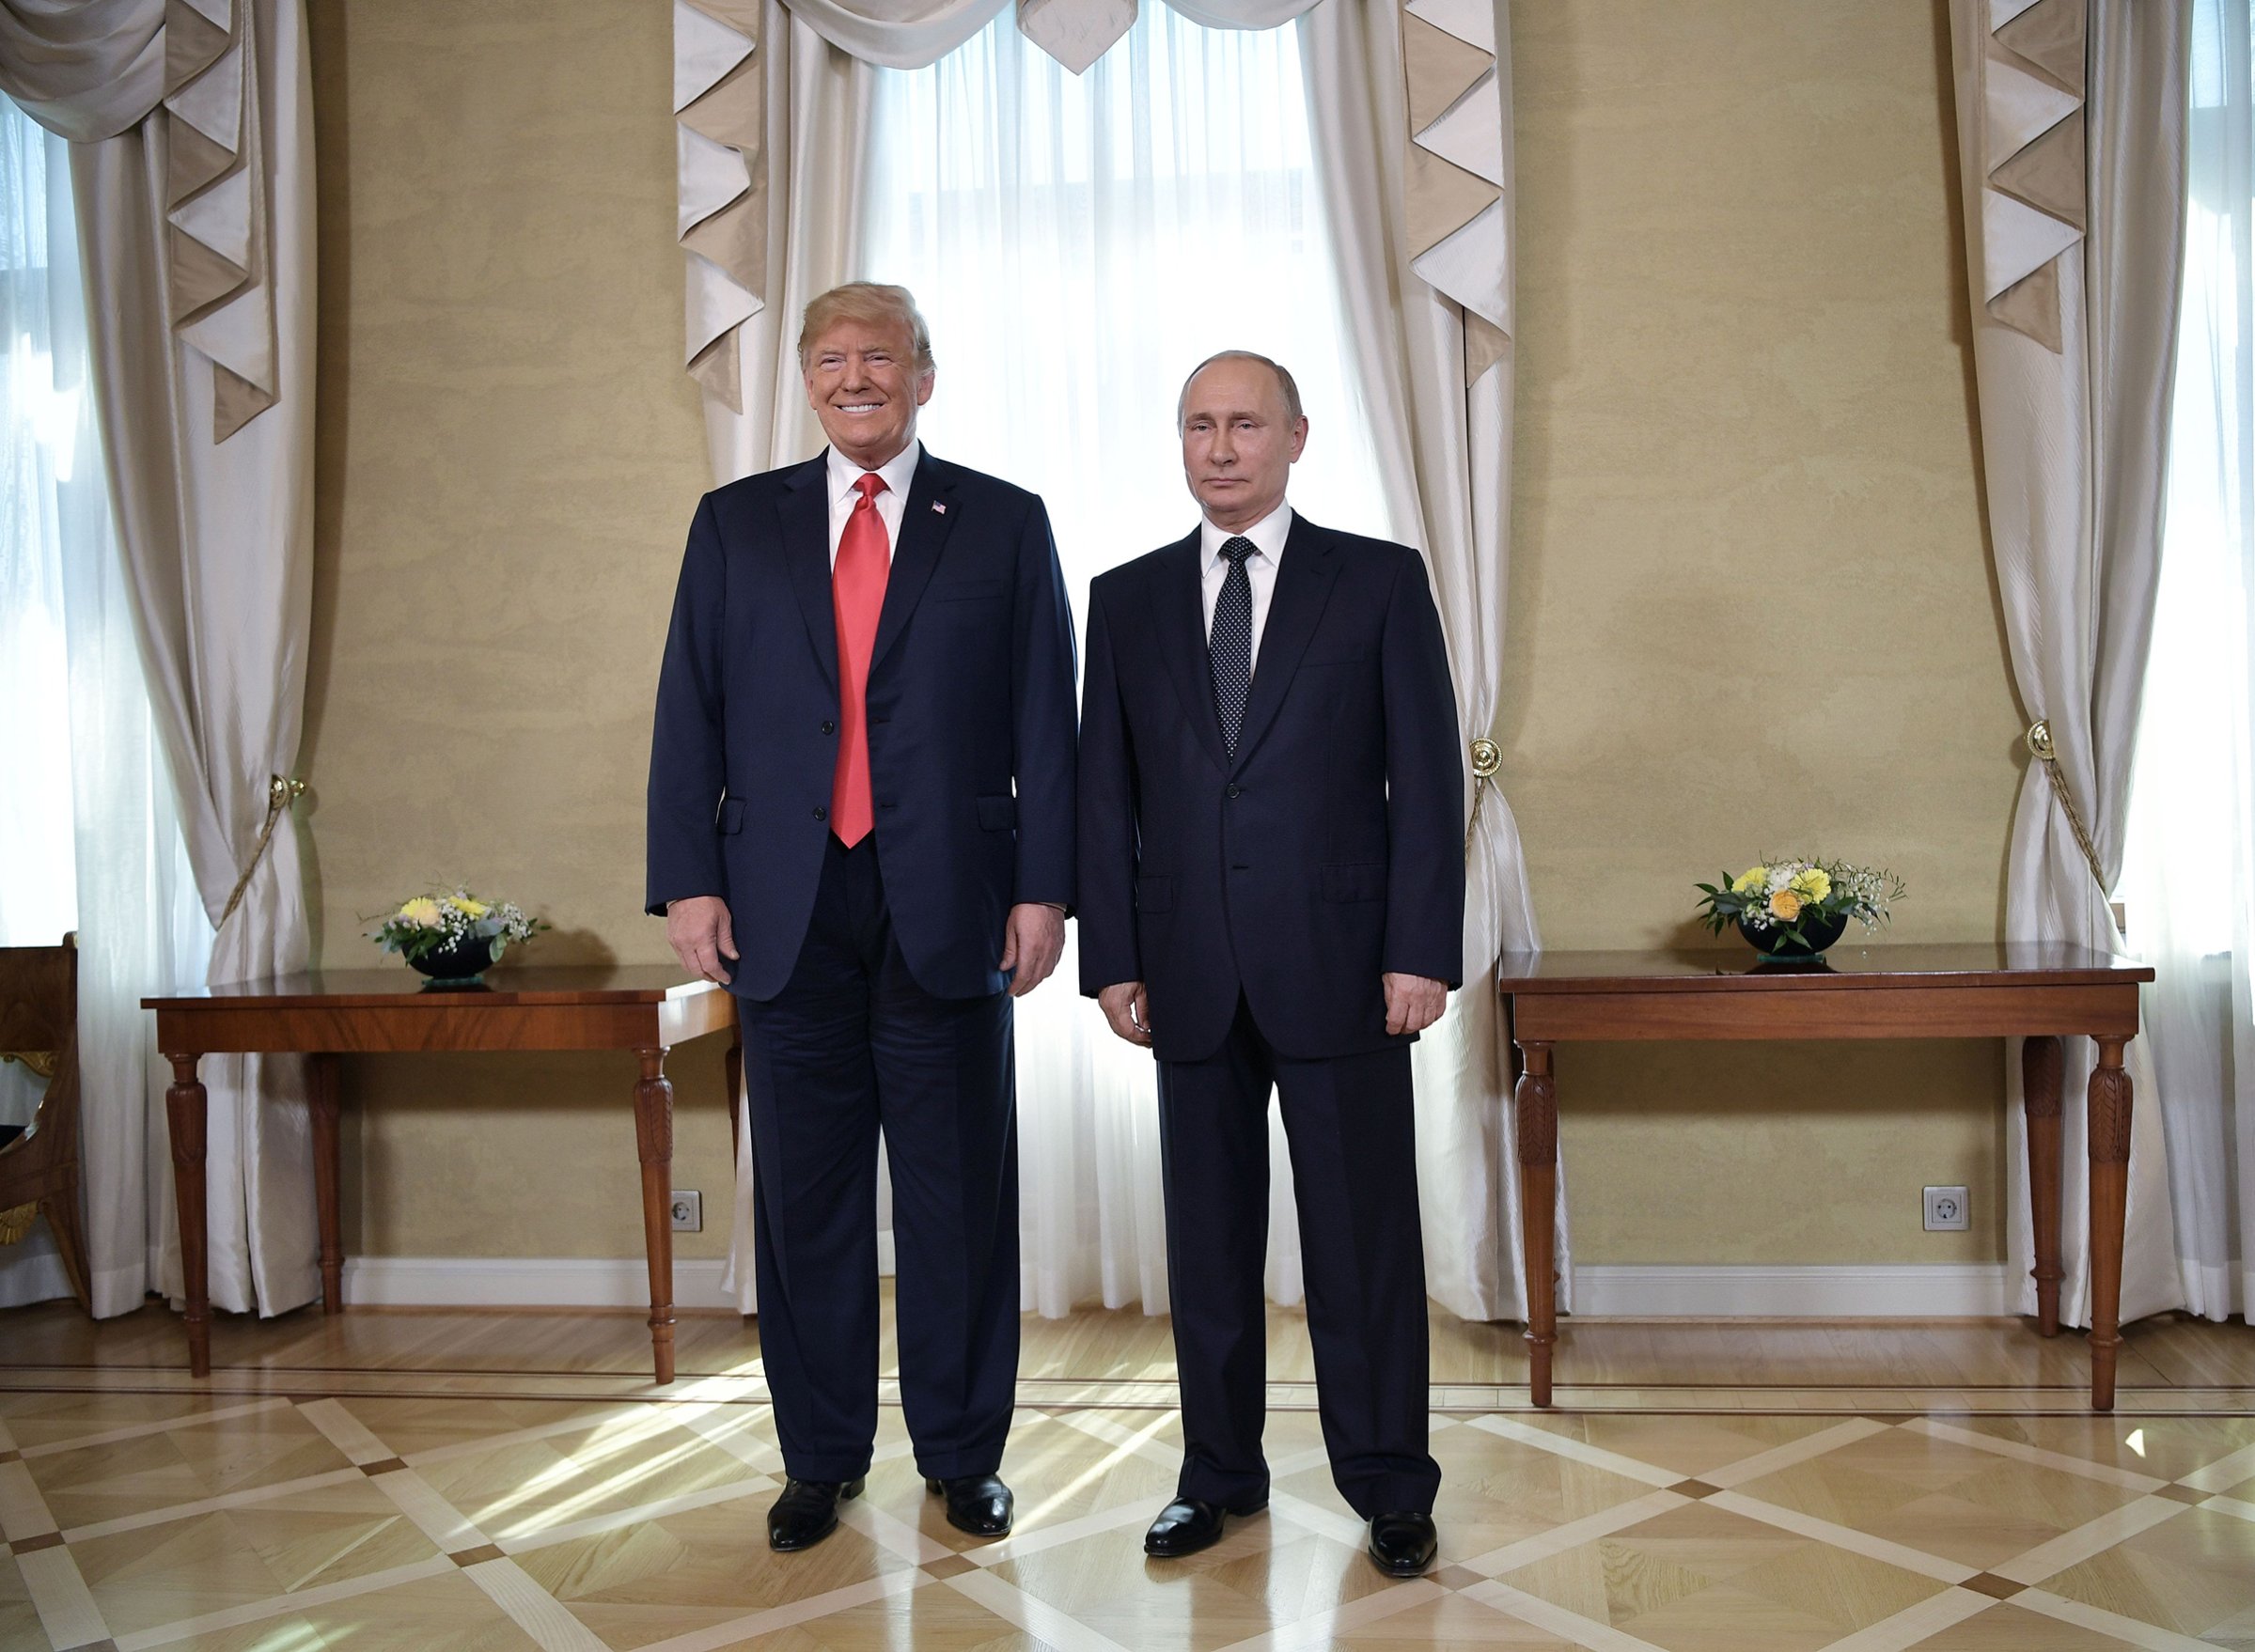 US President Donald Trump and Russia's President Vladimir Putin pose ahead a meeting in Helsinki, on July 16, 2018.